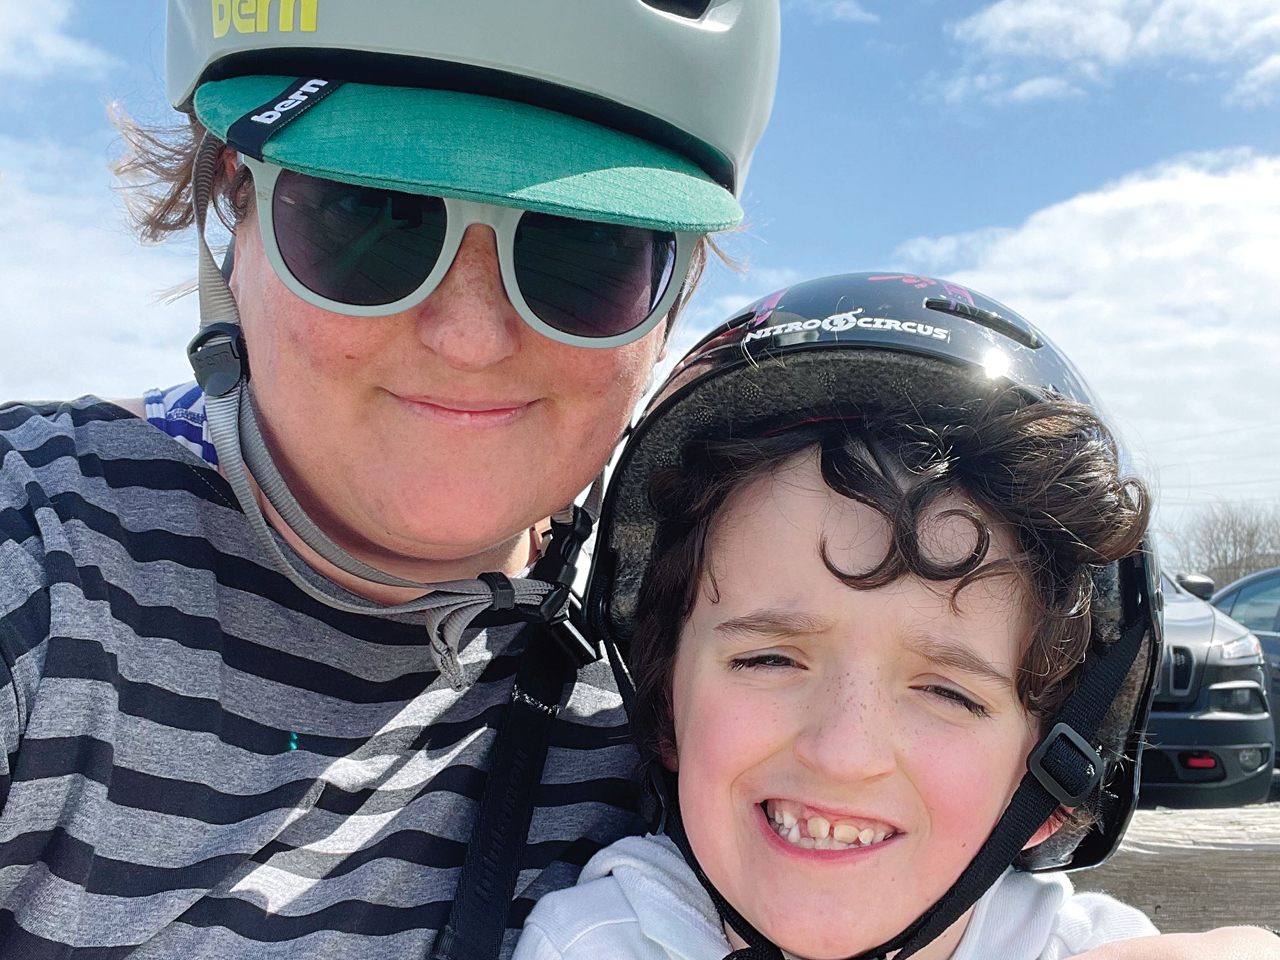 A selfie of the author and her son in bike helmets against a cloudy blue sky